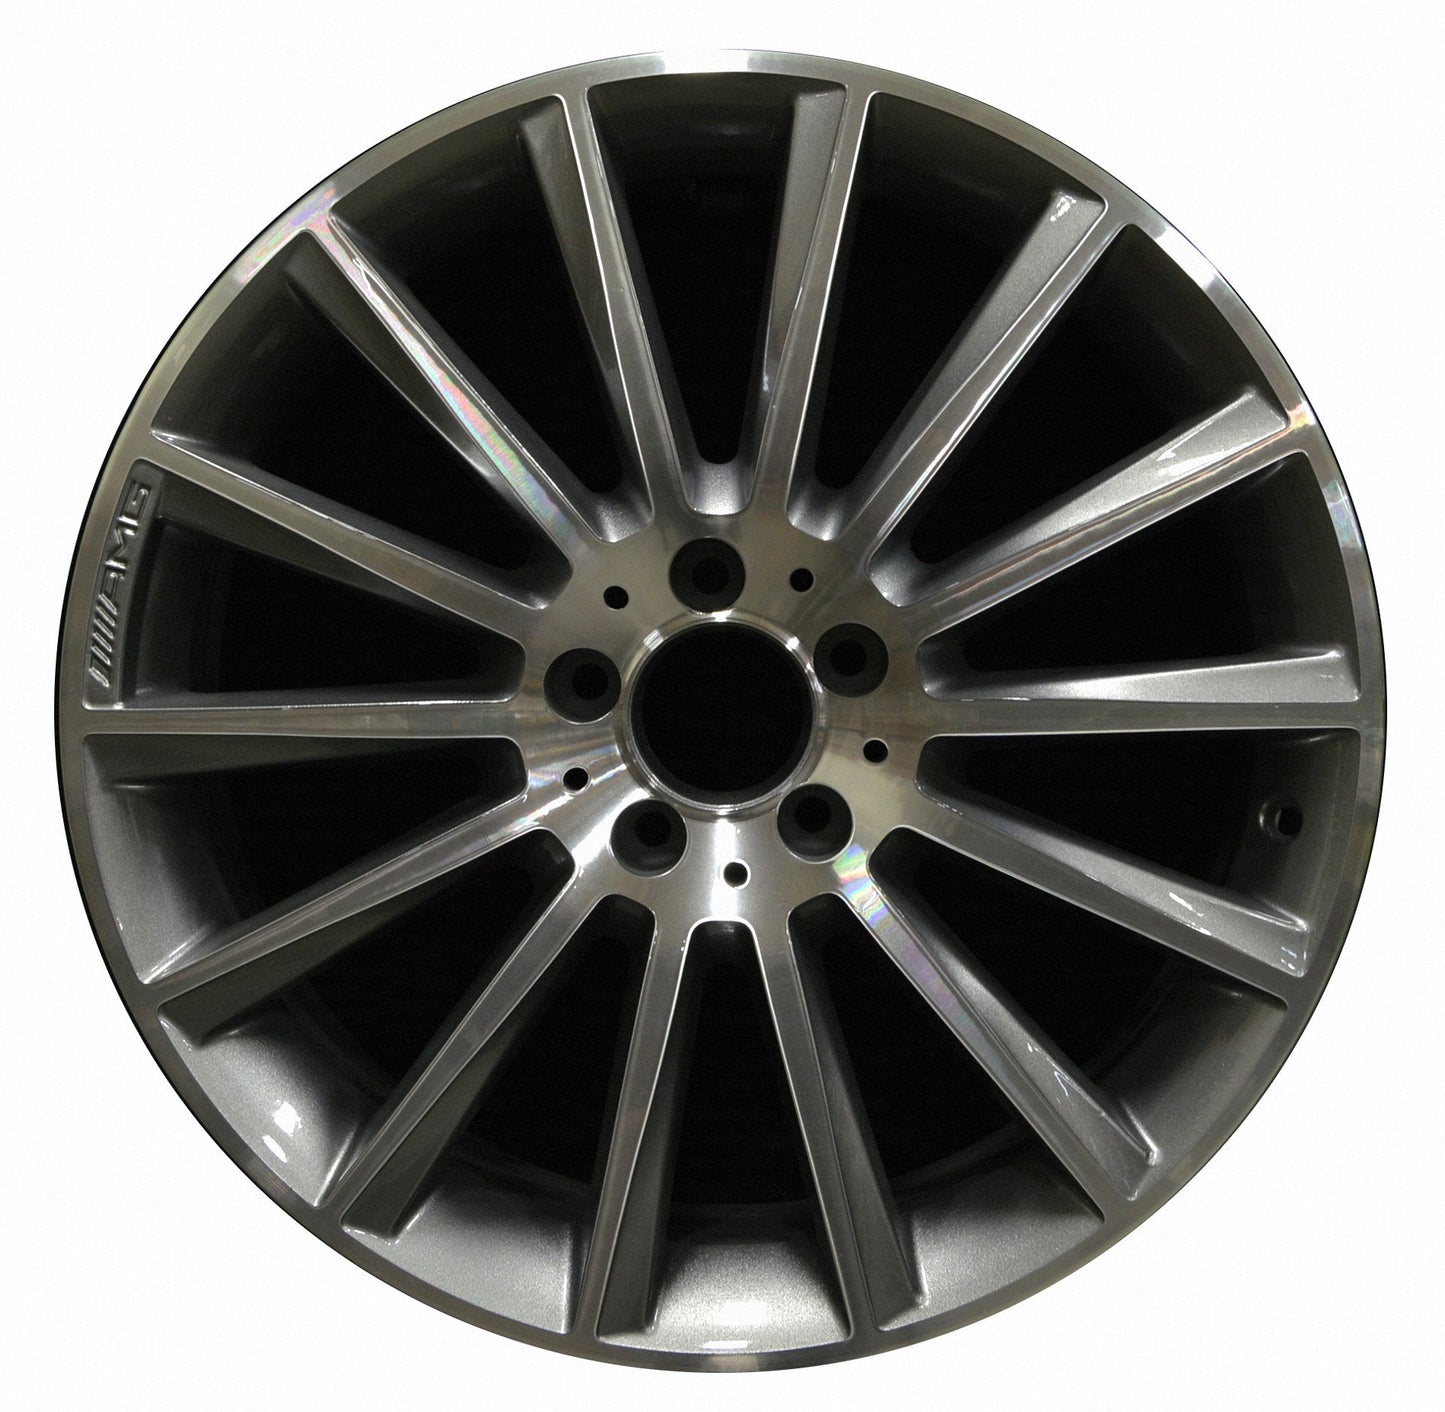 Mercedes C300d  2016 Factory OEM Car Wheel Size 19x8.5 Alloy WAO.85375RE.LC98.MABRT